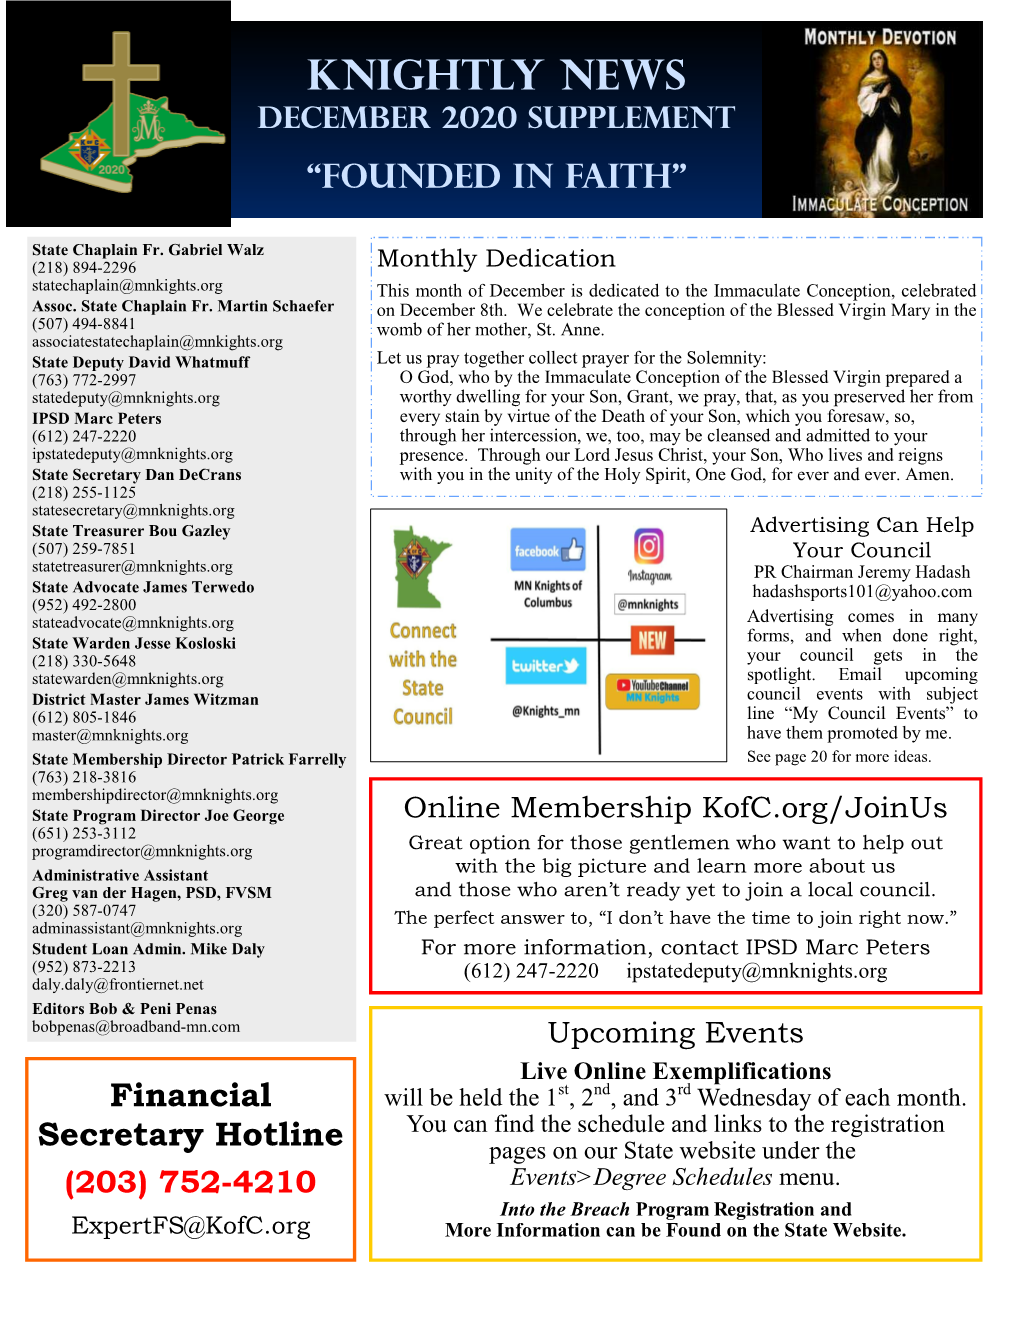 Knightly News December 2020 Supplement “Founded in Faith”